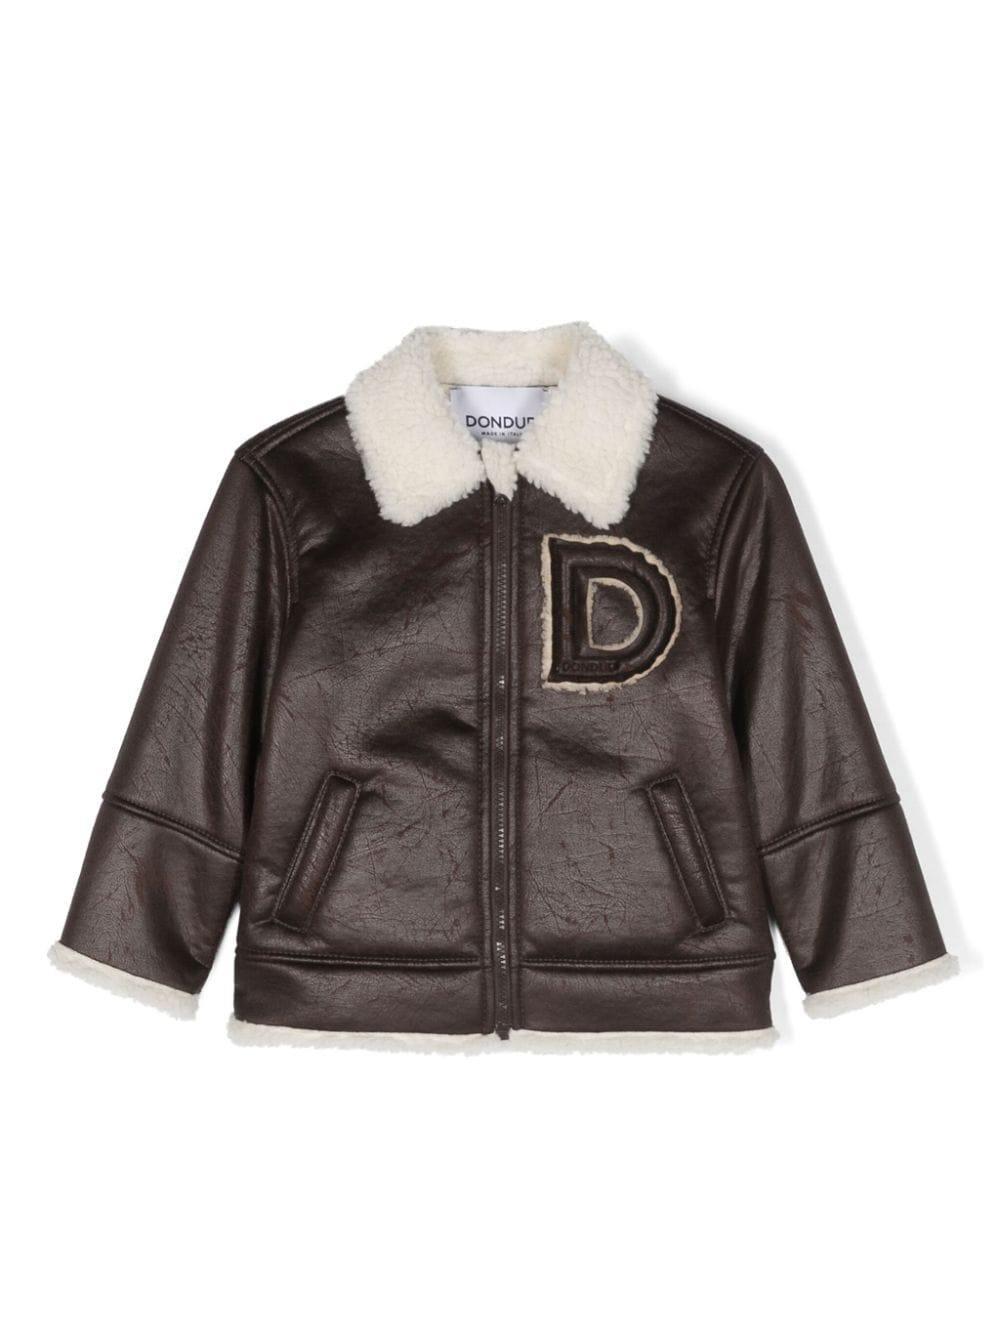 Dondup Kids' Brown Faux Leather Jacket For Boy